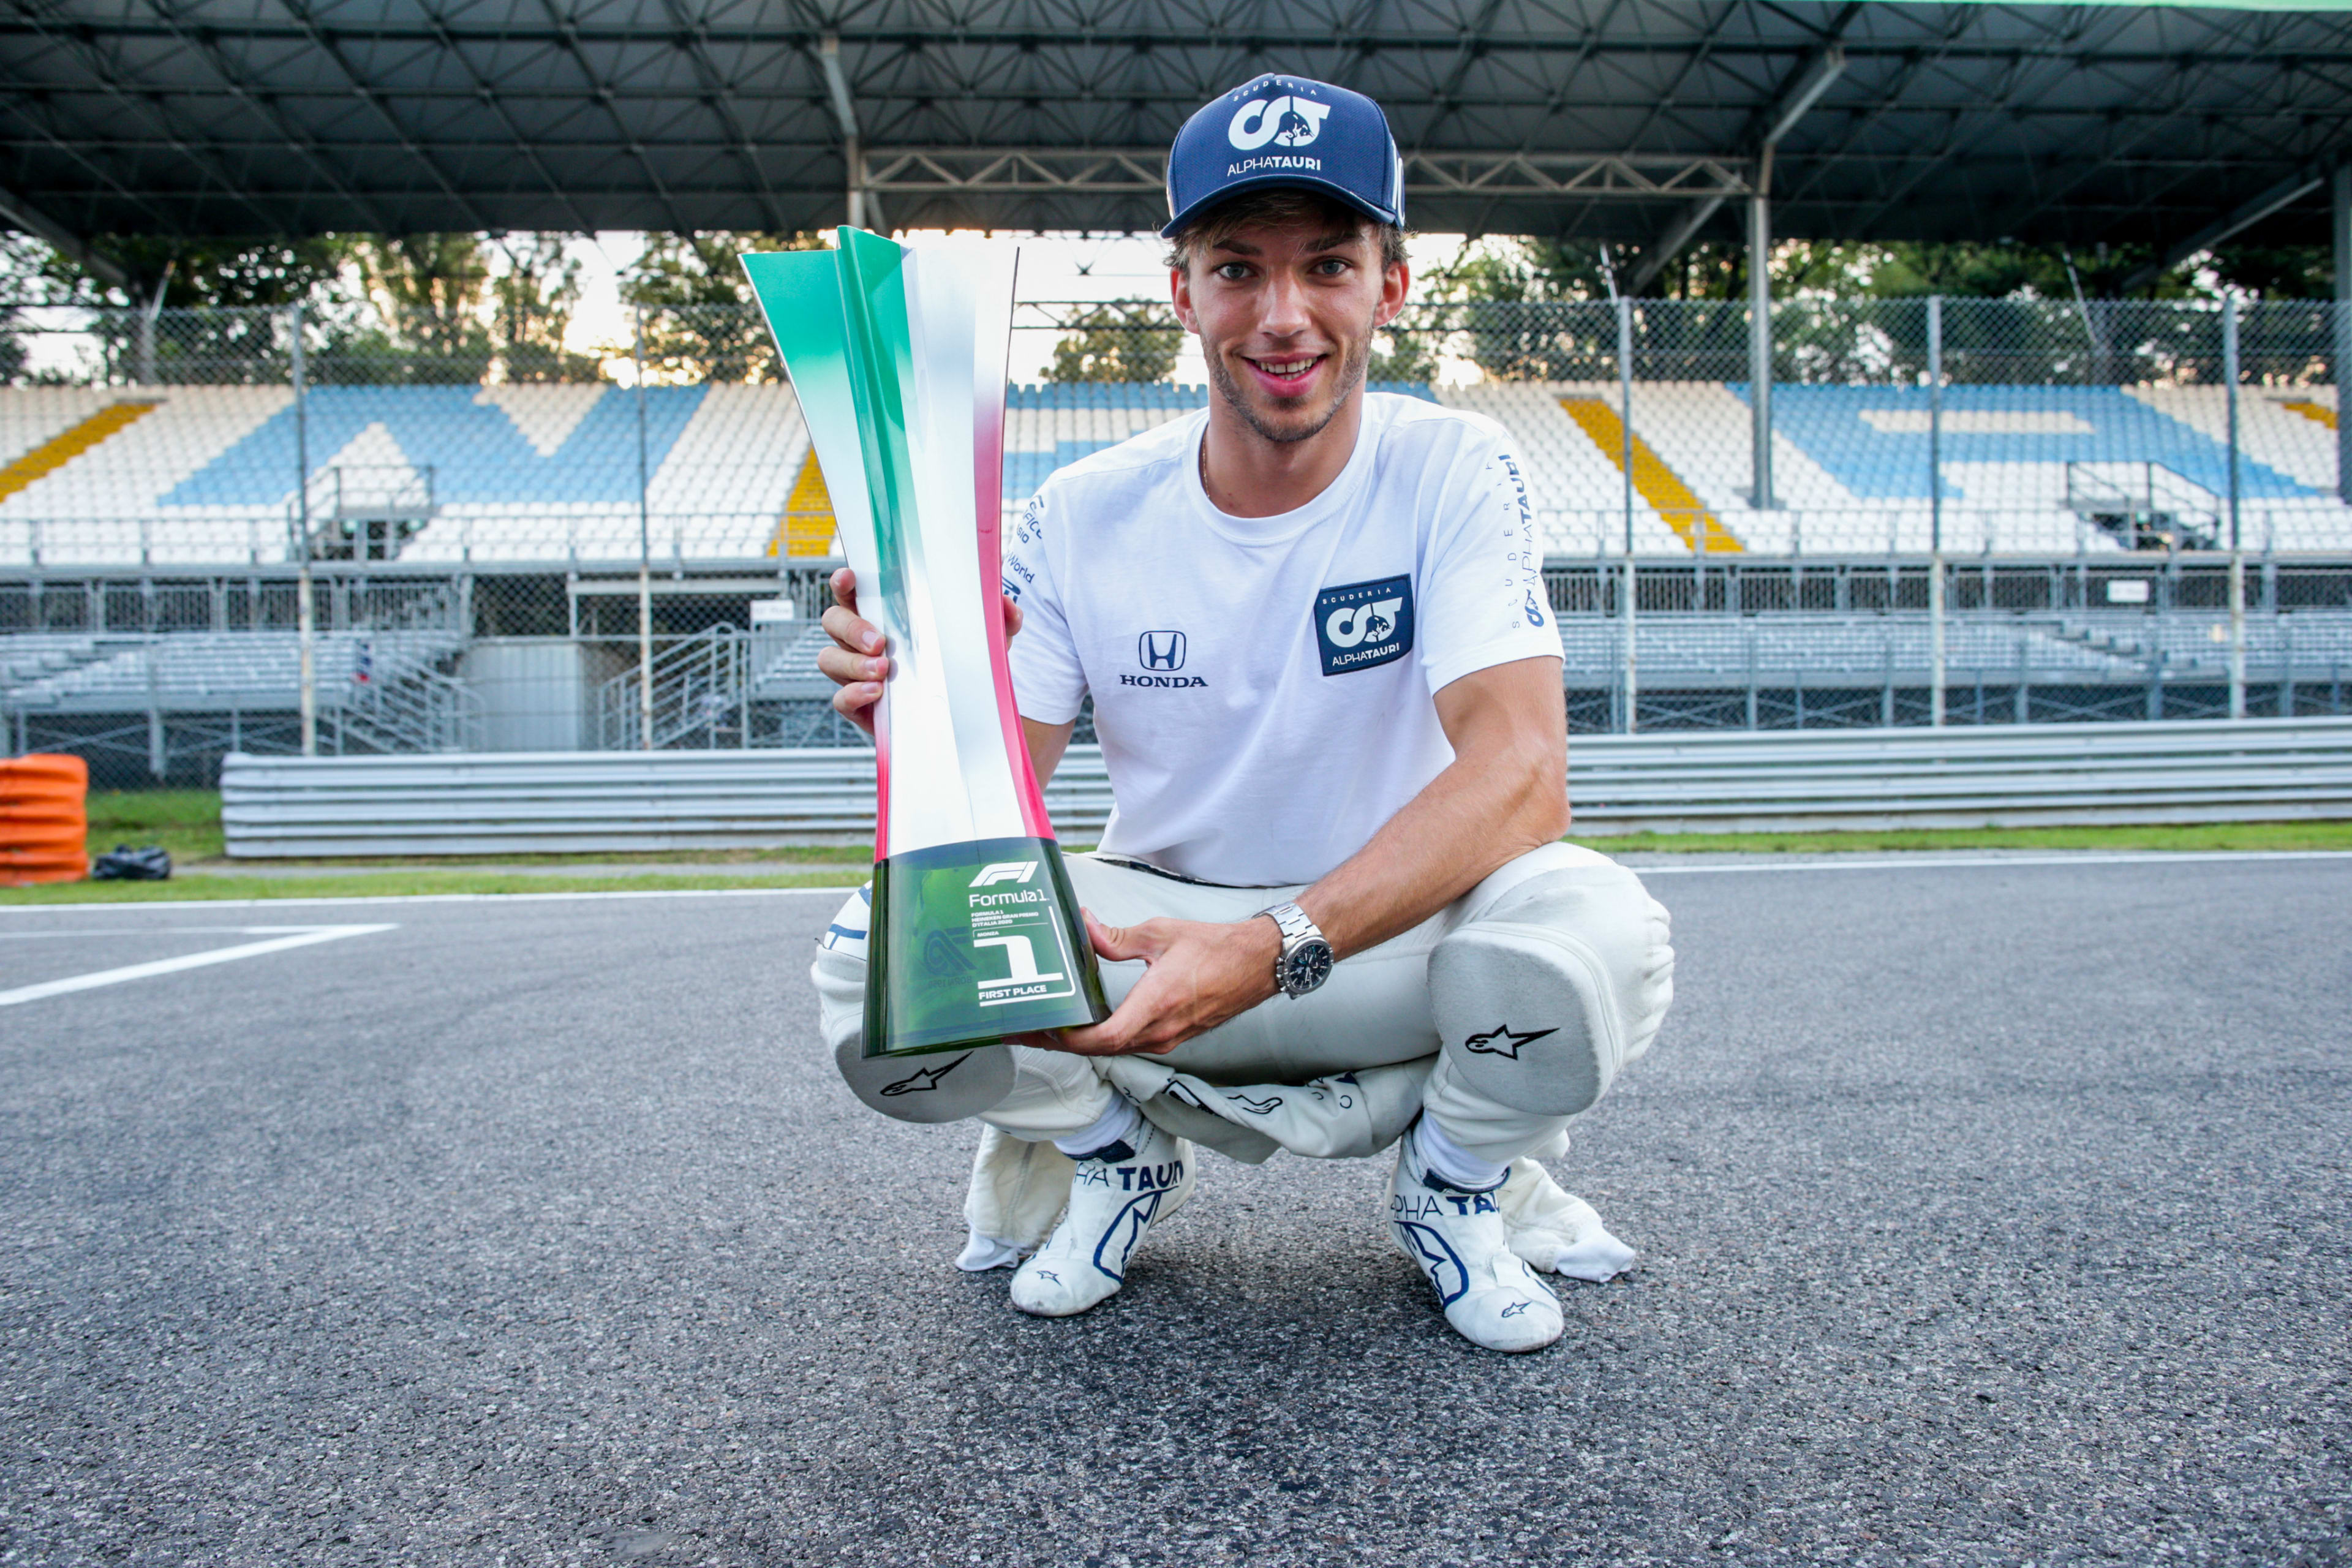 Italian Grand Prix 2020 race report and highlights Gasly beats Sainz to maiden win in Monza thriller, as Hamilton recovers to P7 after penalty Formula 1®